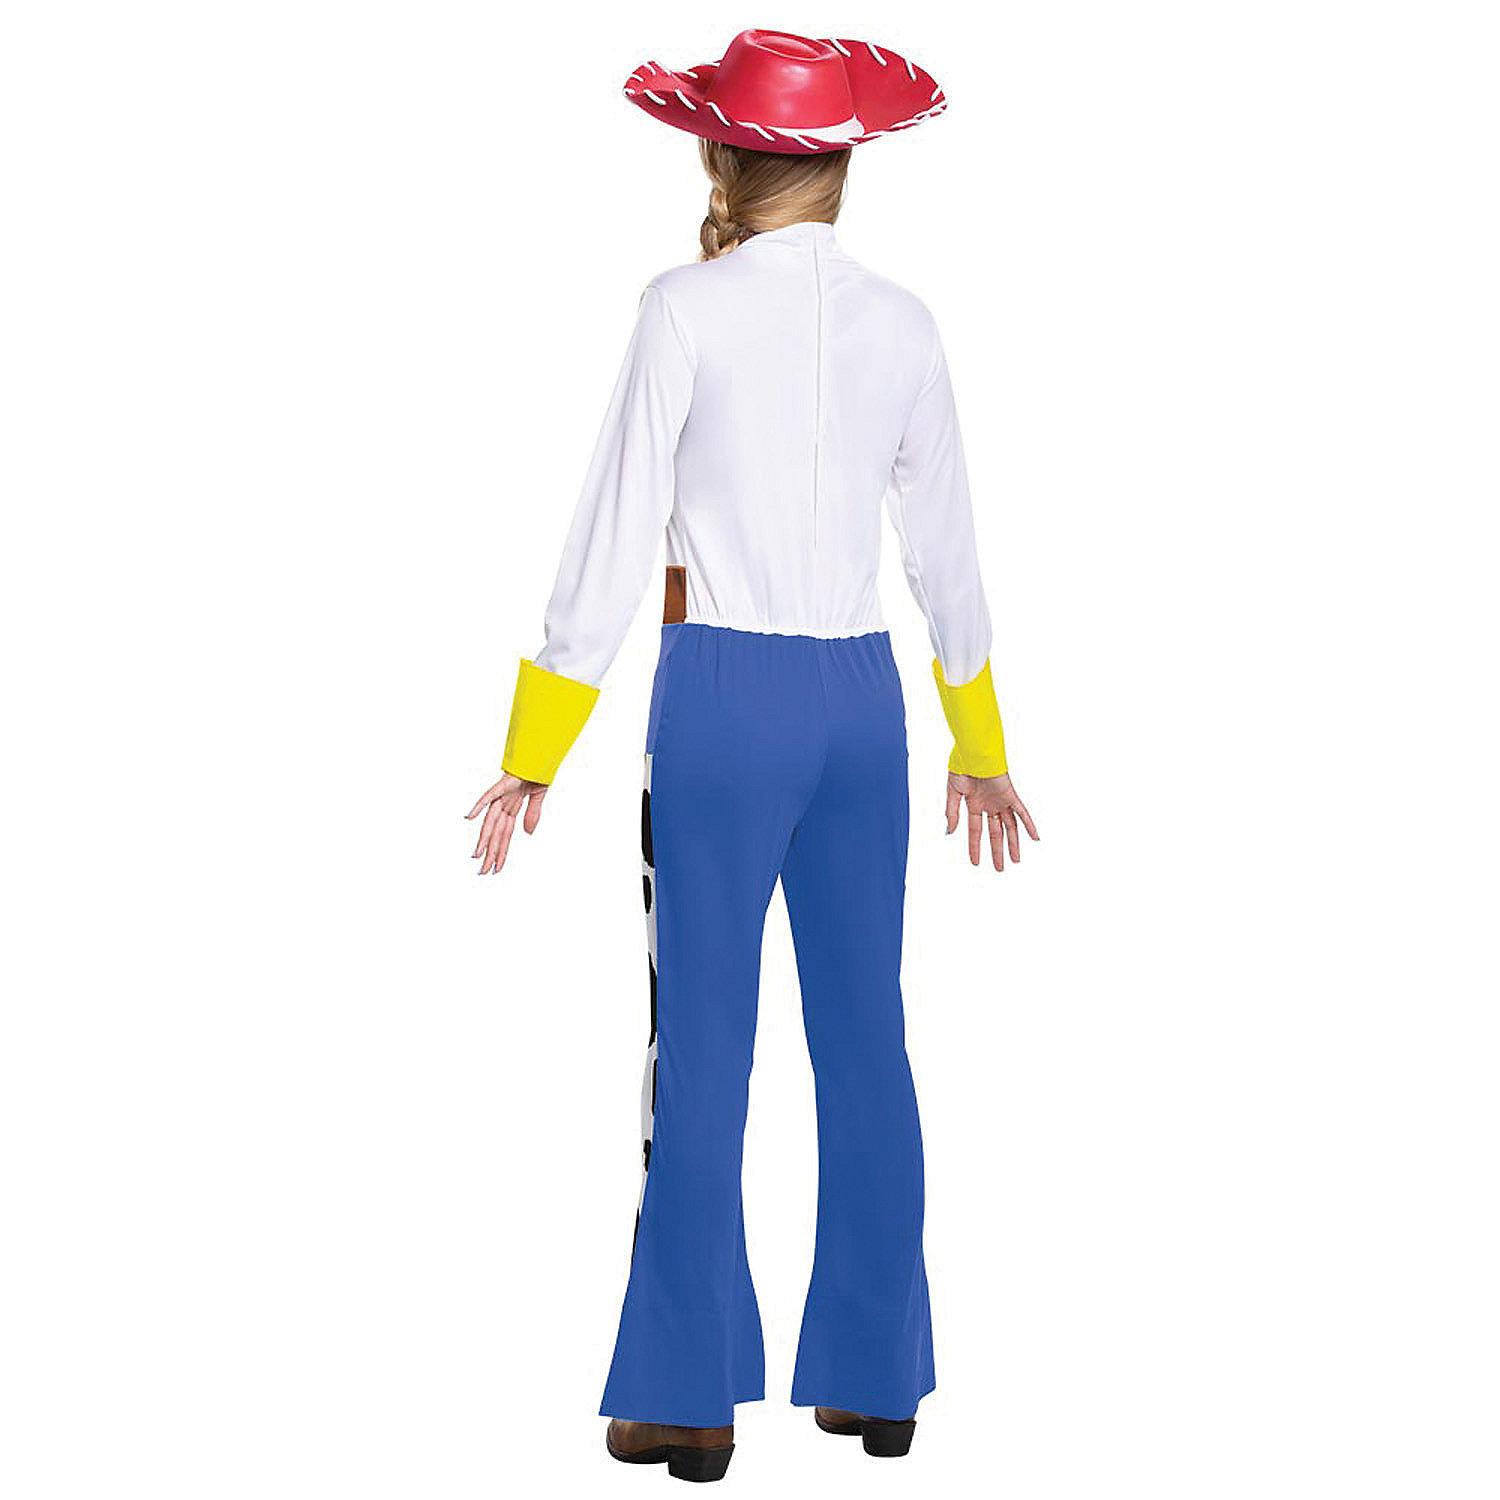 Disguise Womens Toy Story Classic Jessie Costume - Size Medium - image 2 of 2